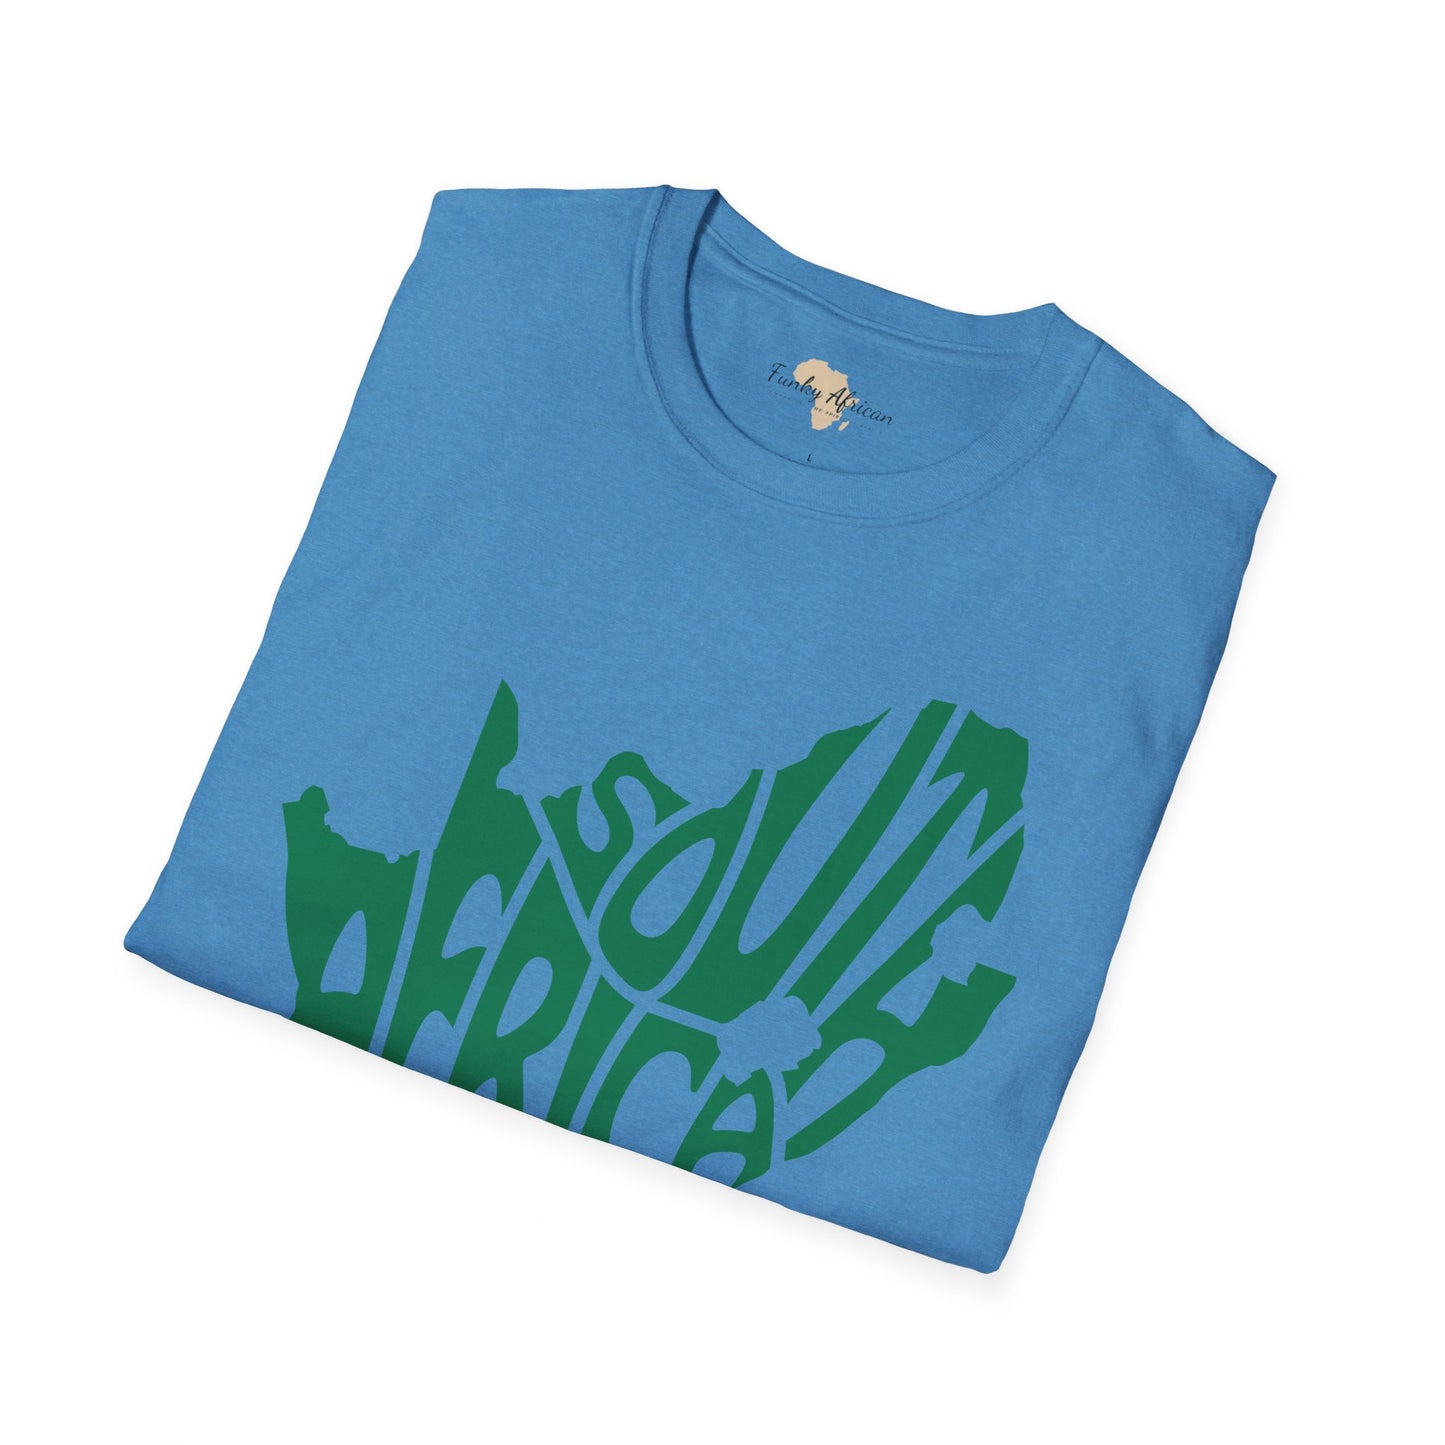 South Africa cut unisex softstyle tee